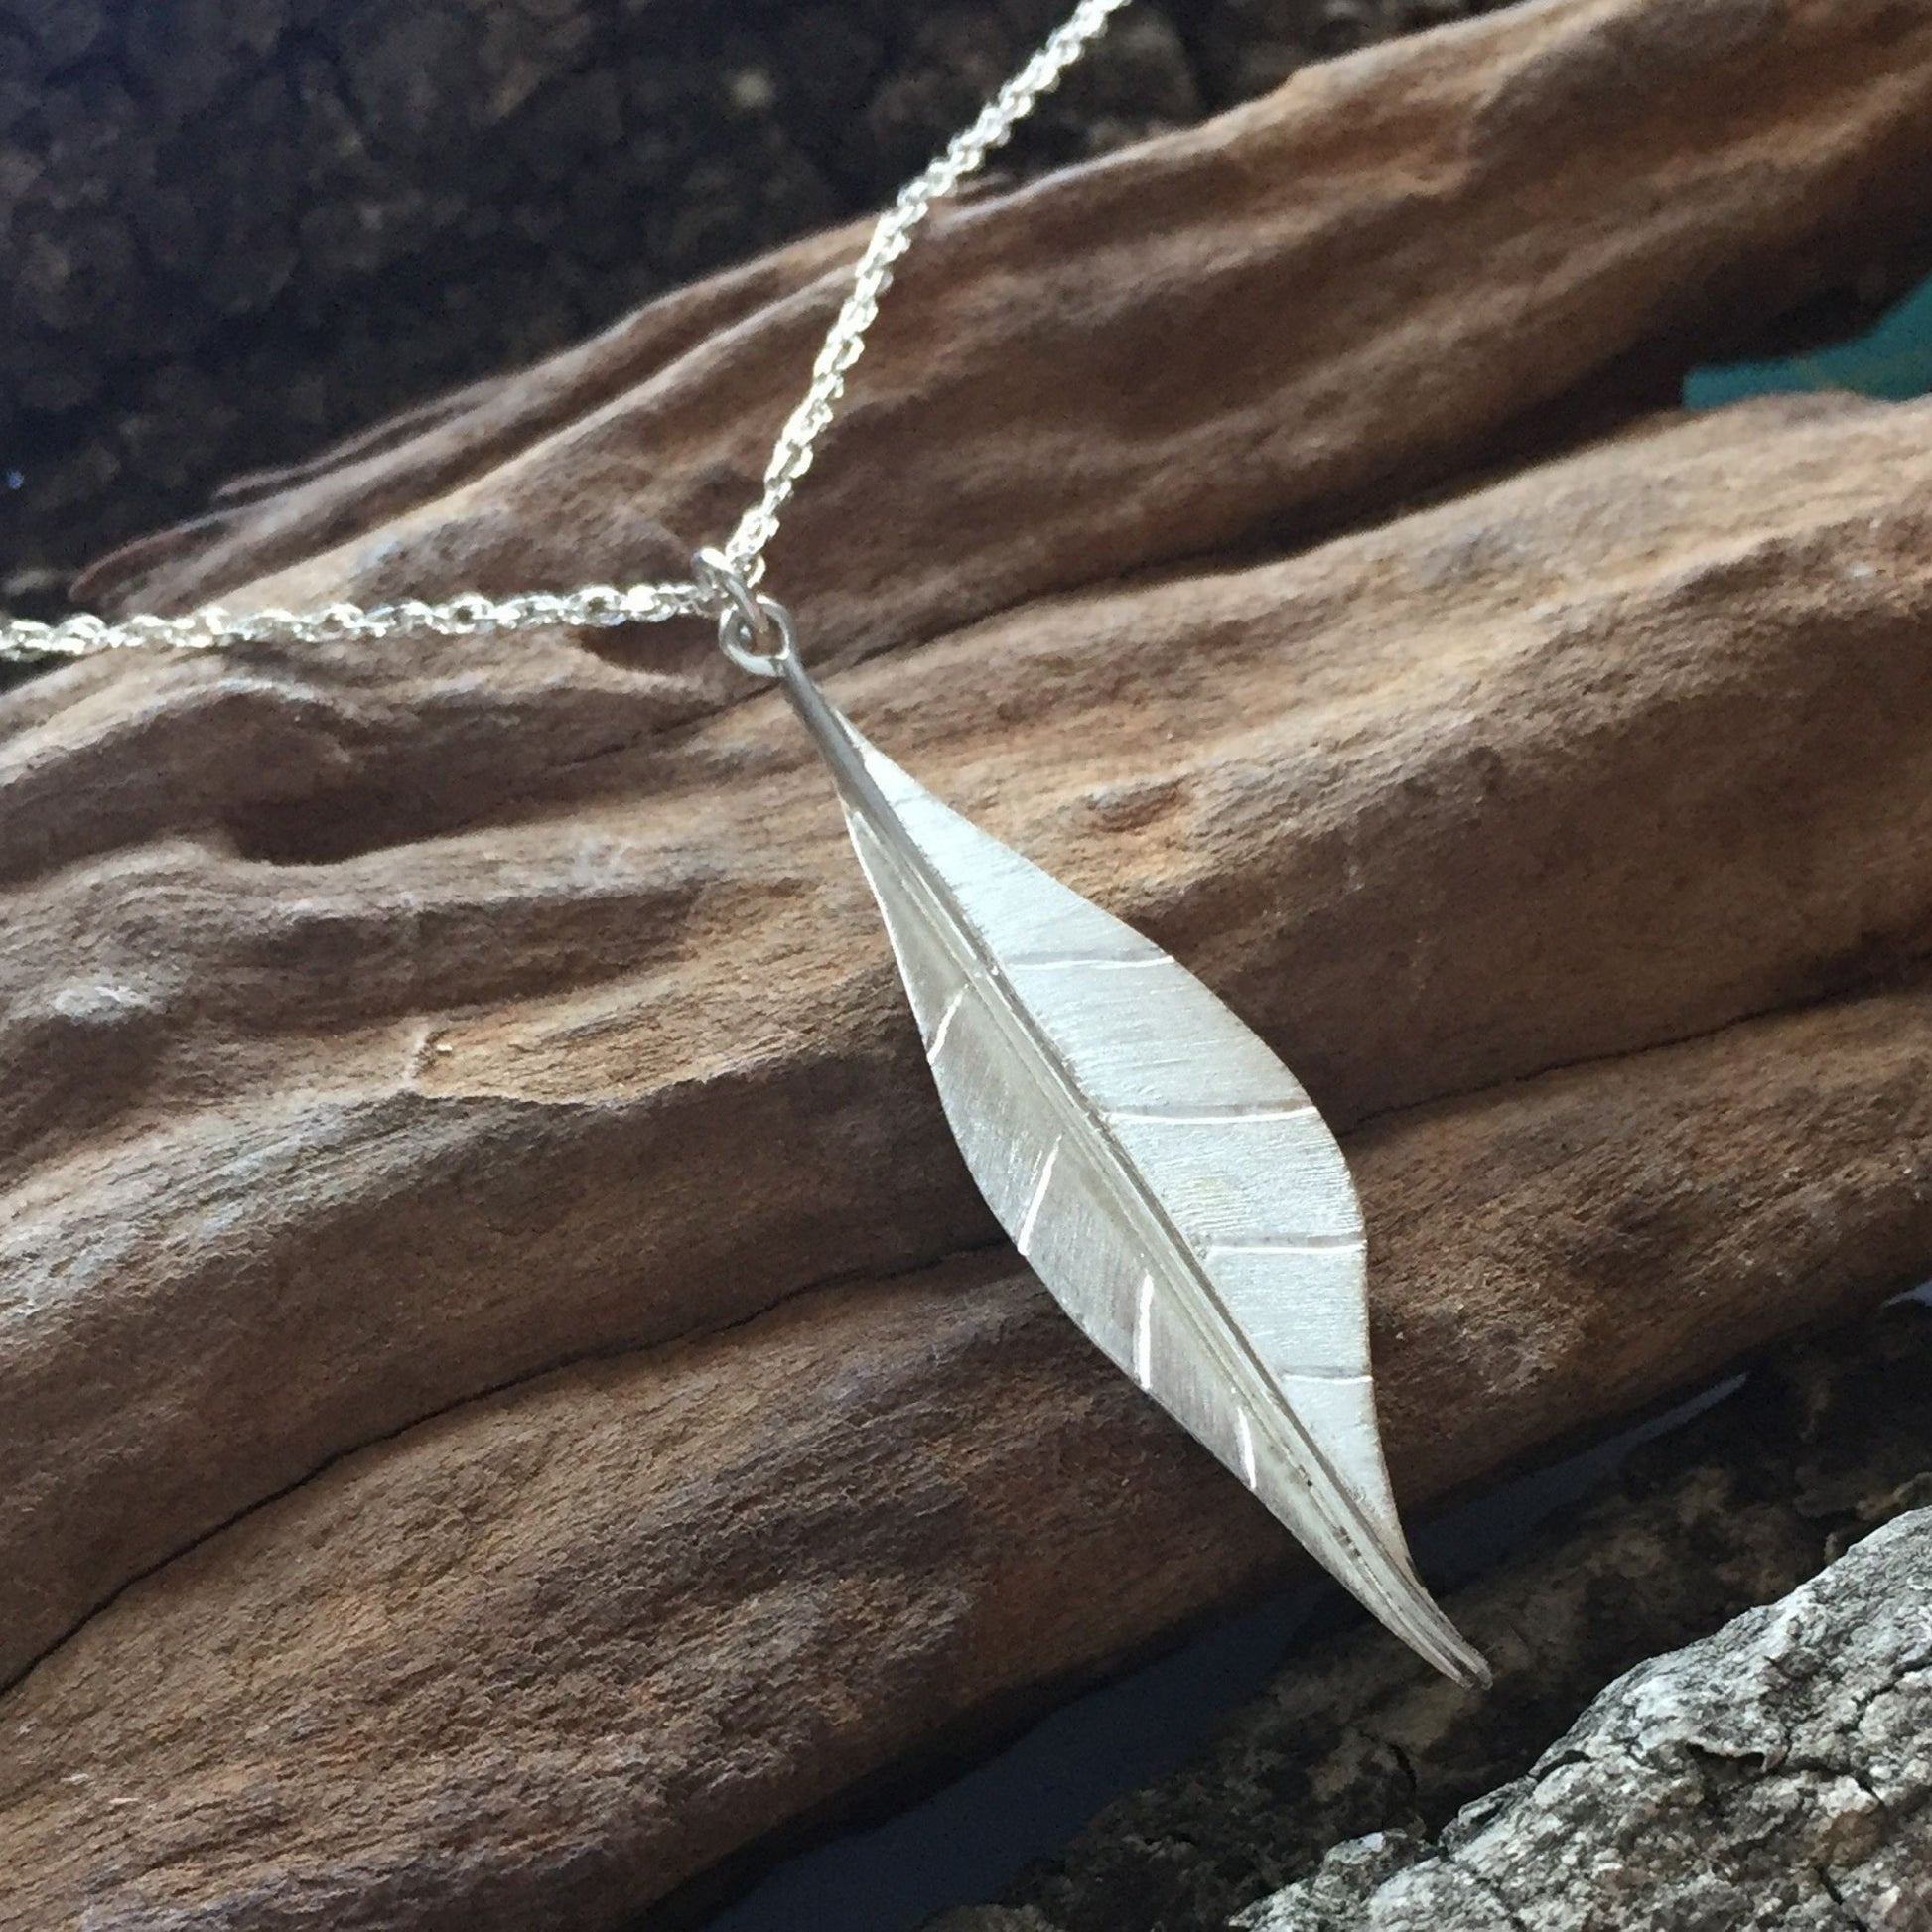 Handmade silver leaf necklace with chain made by The Zuri Collection 